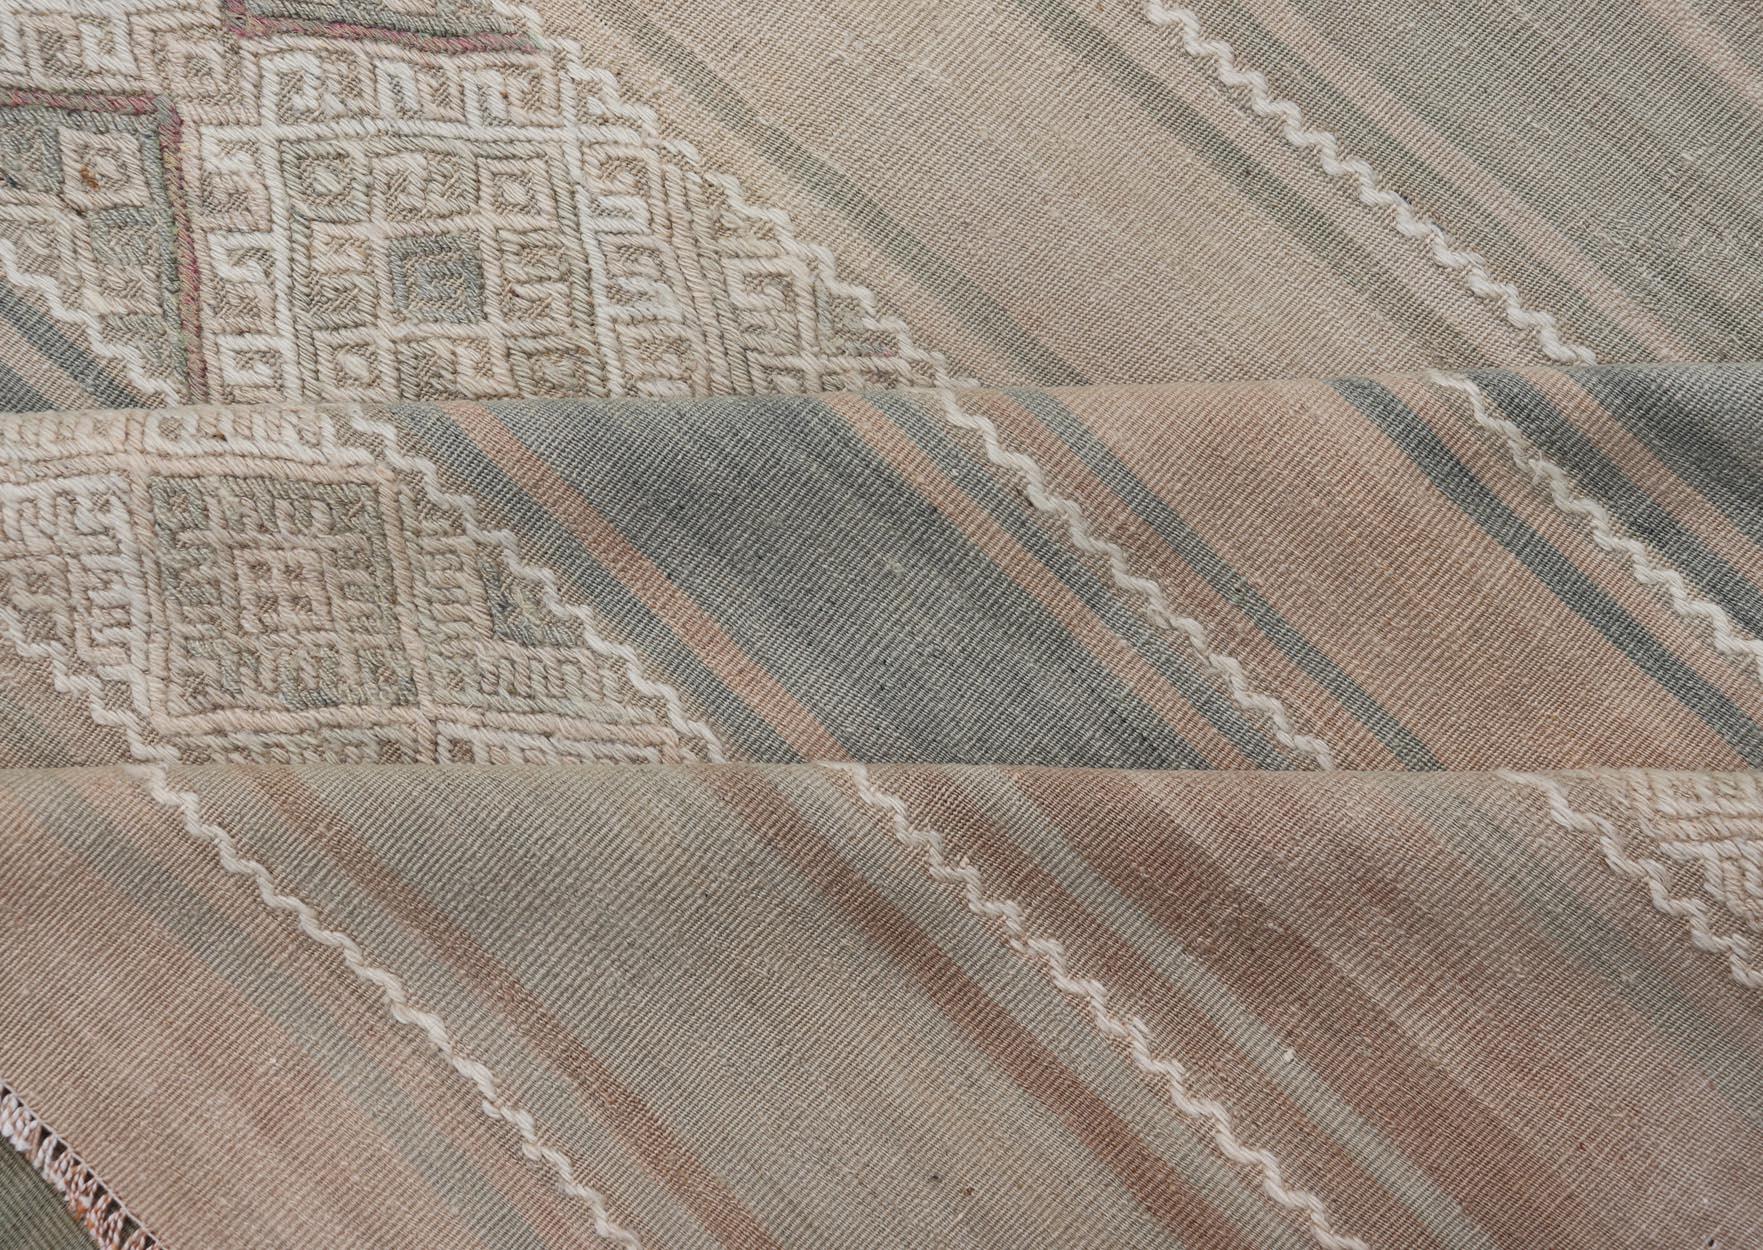 Gallery Vintage Turkish Flat-Weave Kilim with Embroideries in Earthy Tones 5